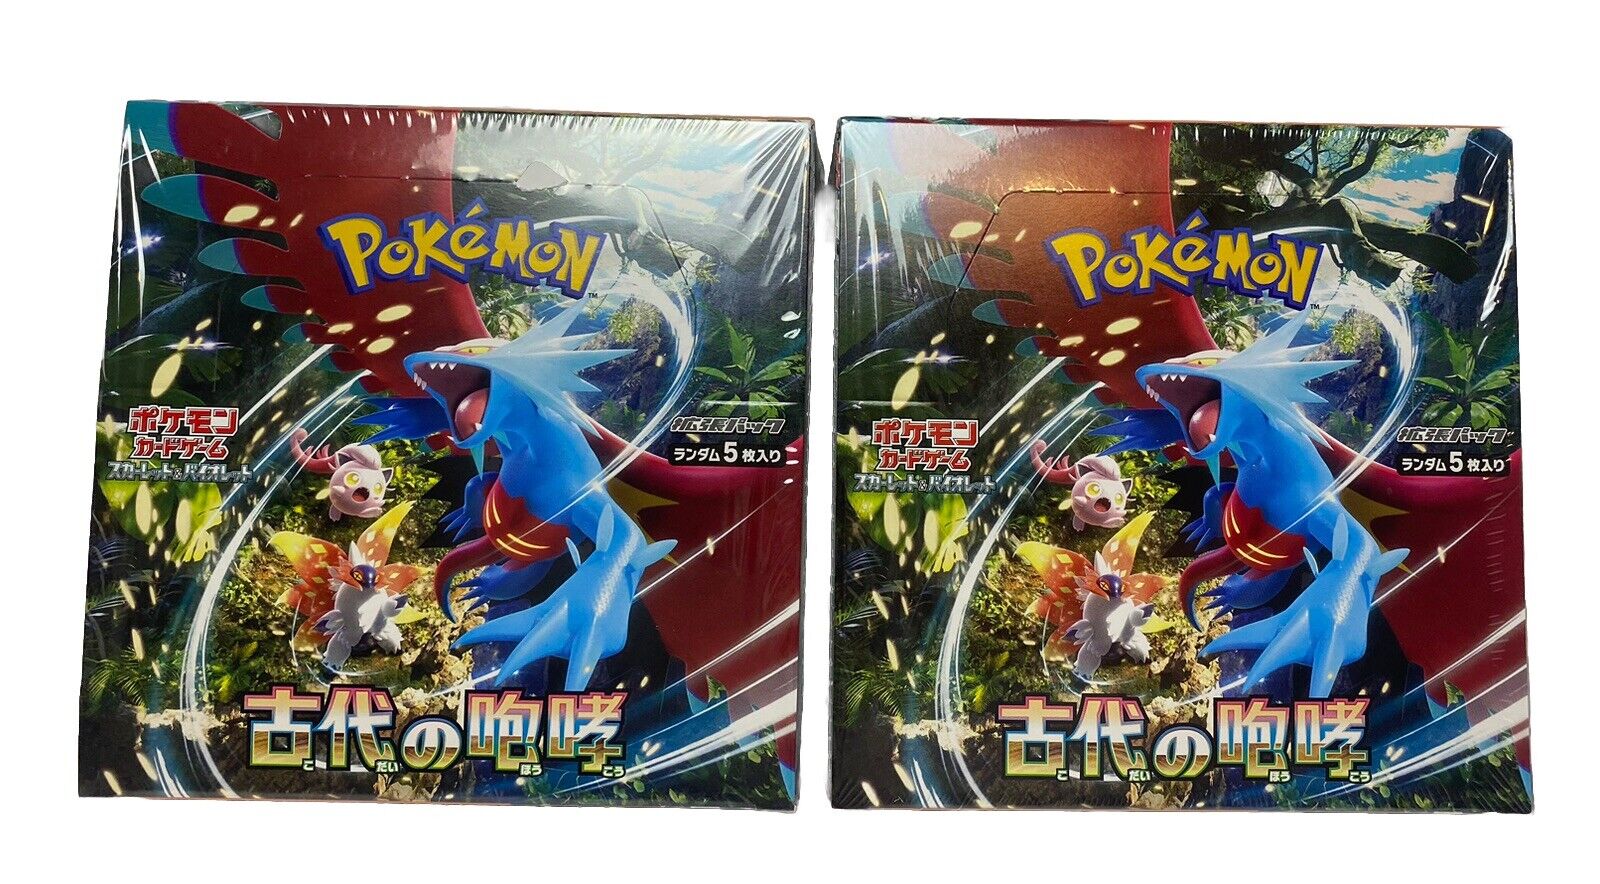 Pokémon Ancient Roar Japanese Factory Sealed New Booster Boxes With Shrink (2)